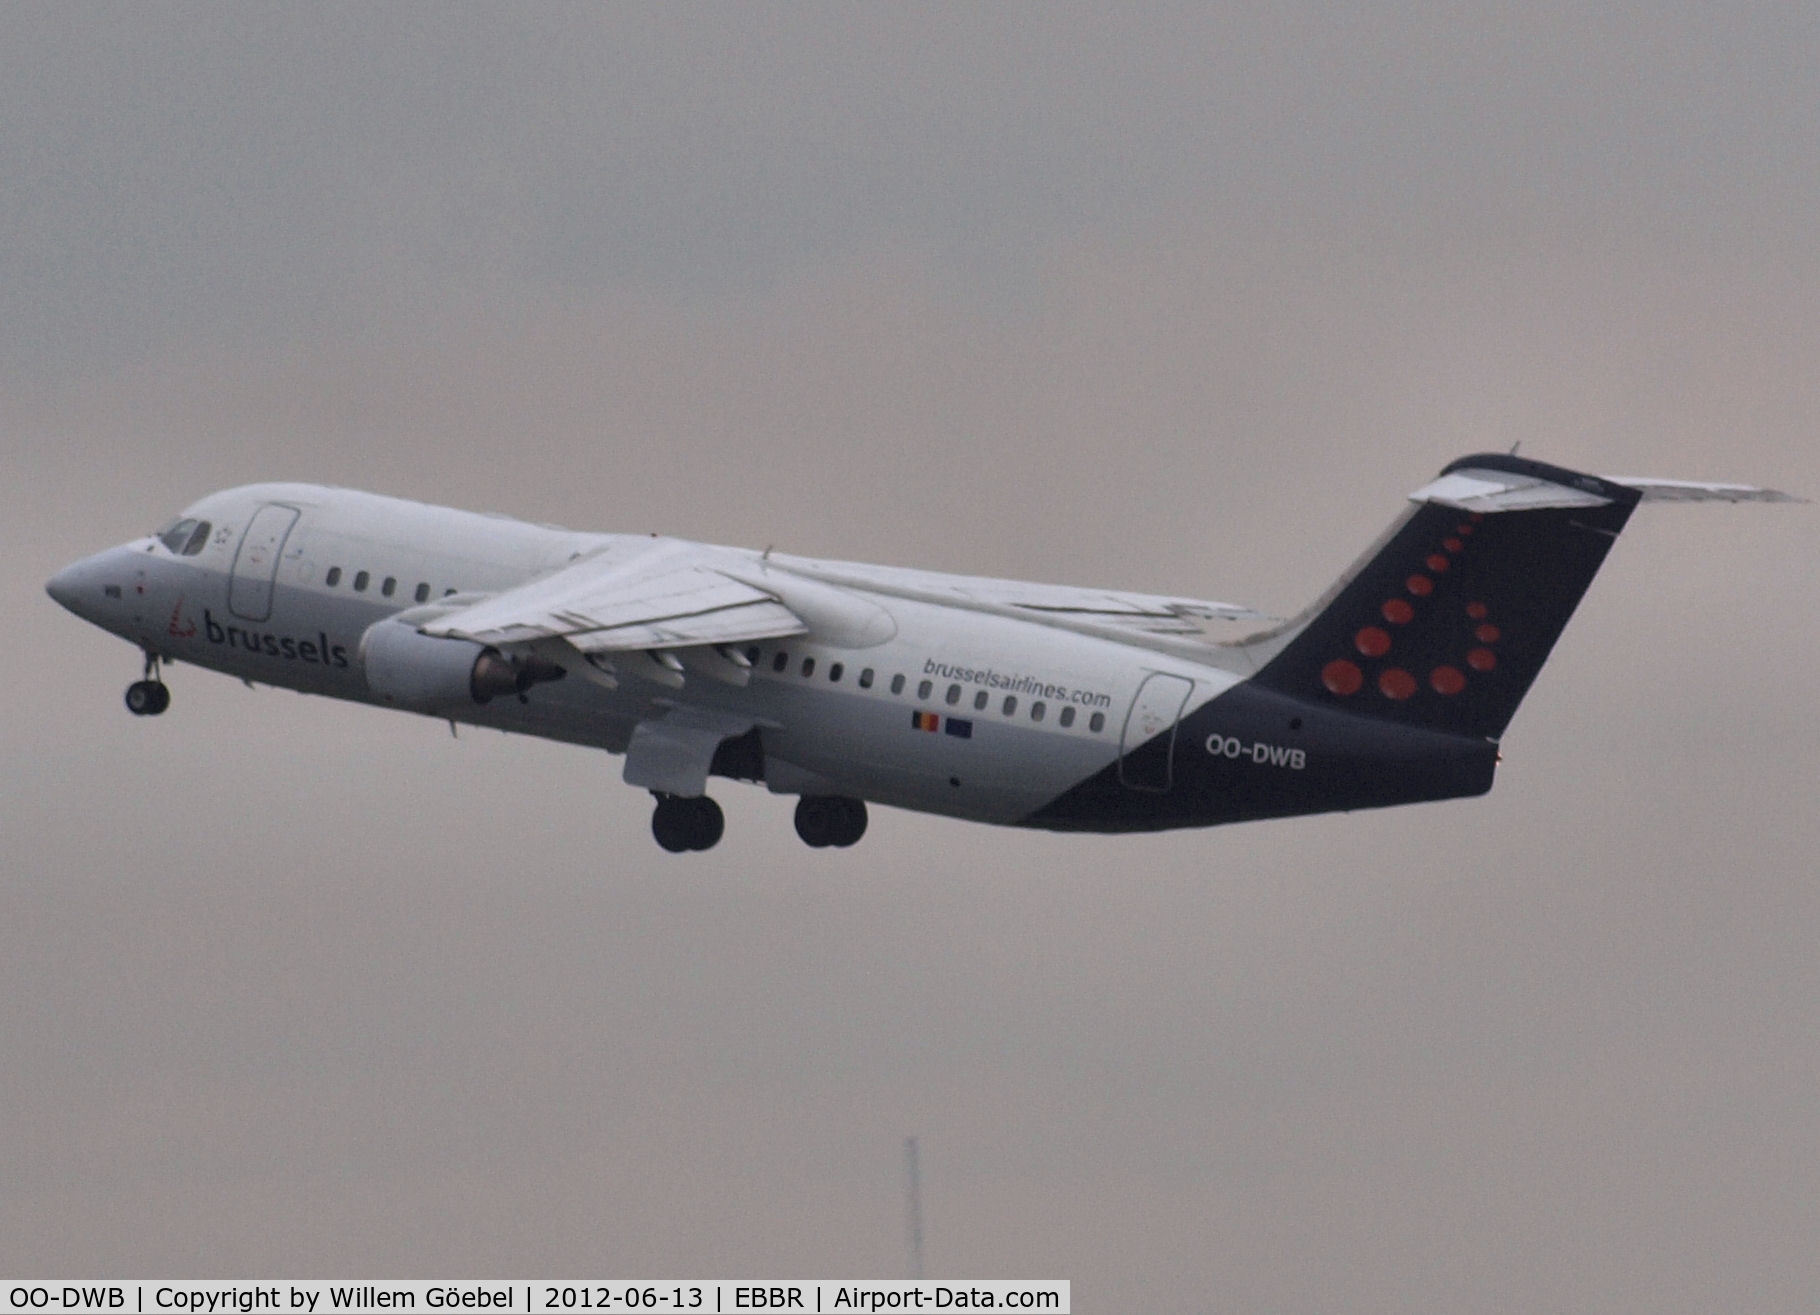 OO-DWB, 1997 British Aerospace Avro 146-RJ100 C/N E3315, Take off from Brussel Airport